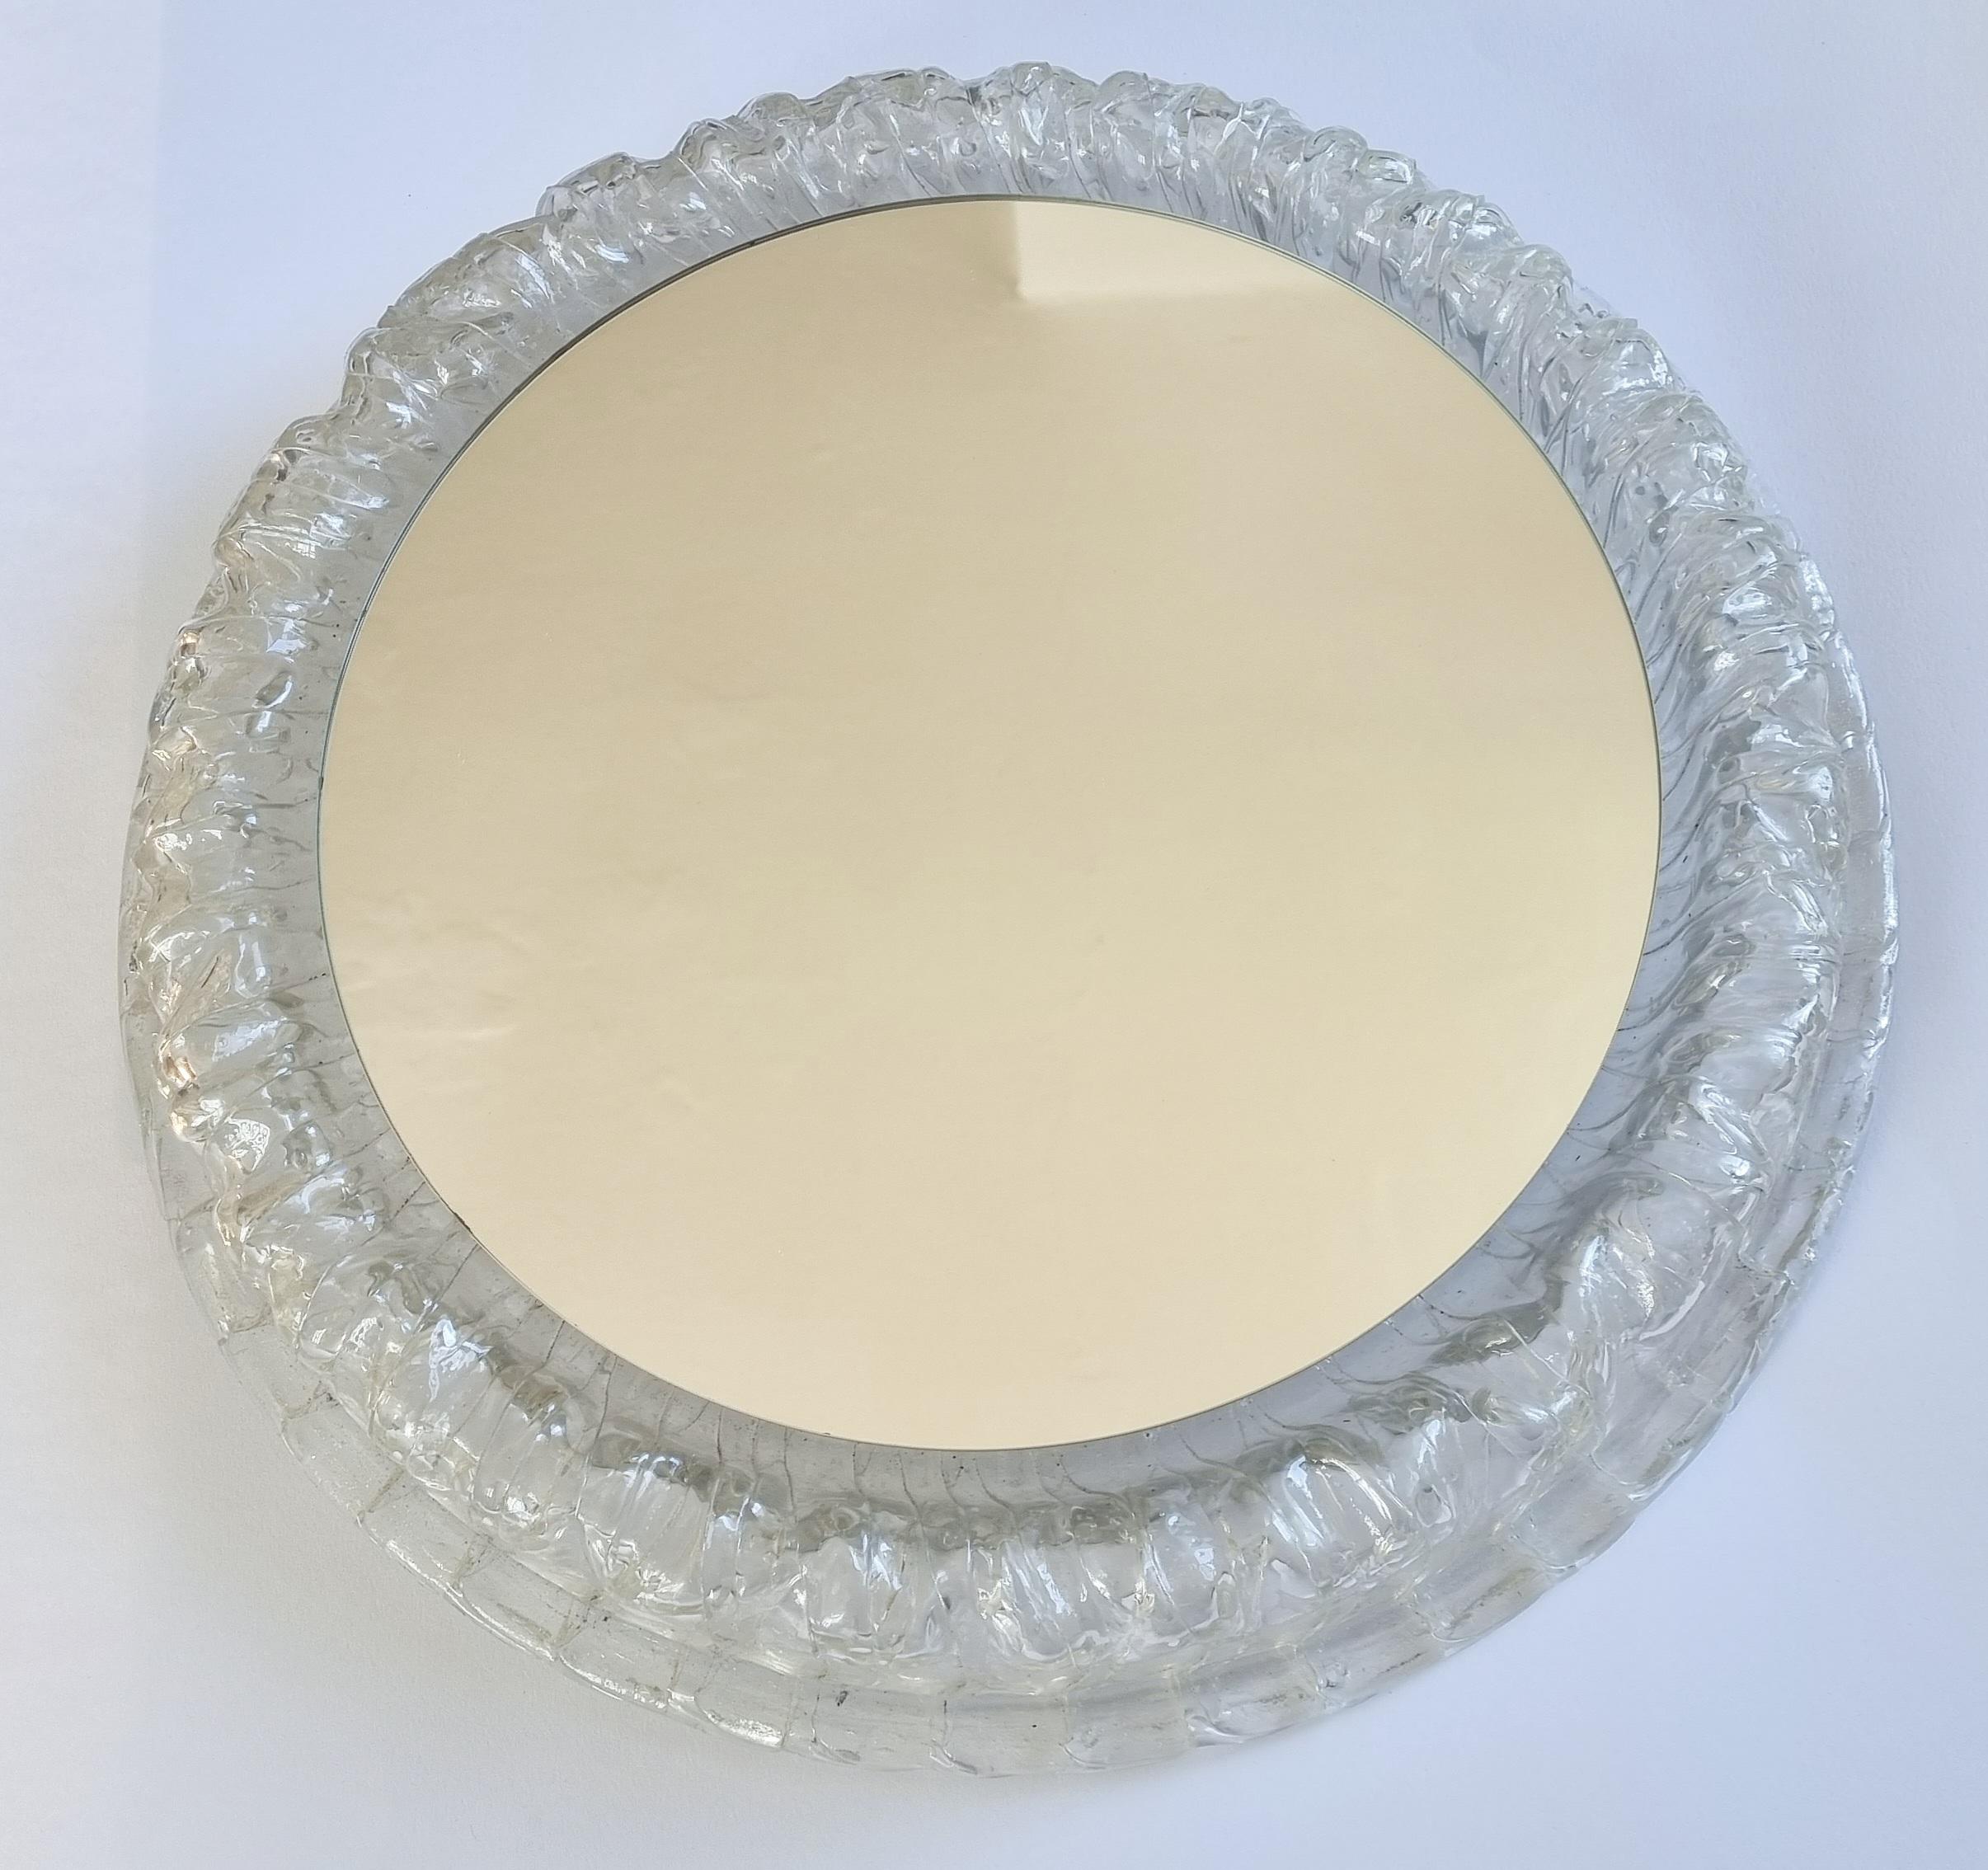 Midcentury Rare Wall Mirror Hillebrand, Germany, 1970s For Sale 4